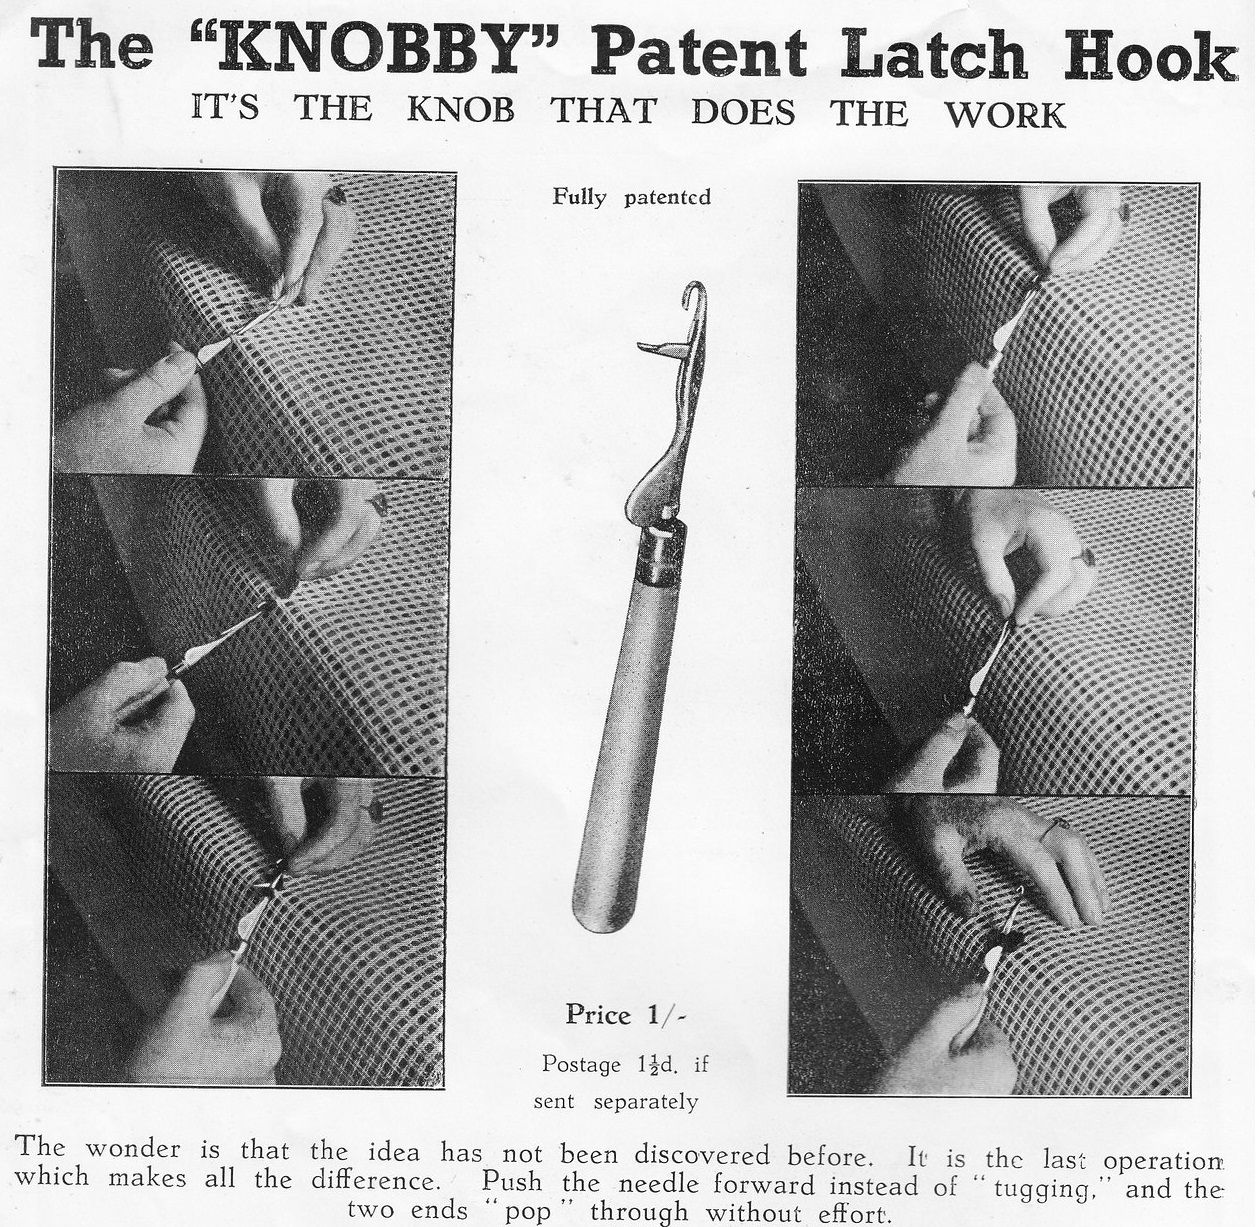 RUG-MAKING HISTORY - THE LATCH-HOOK